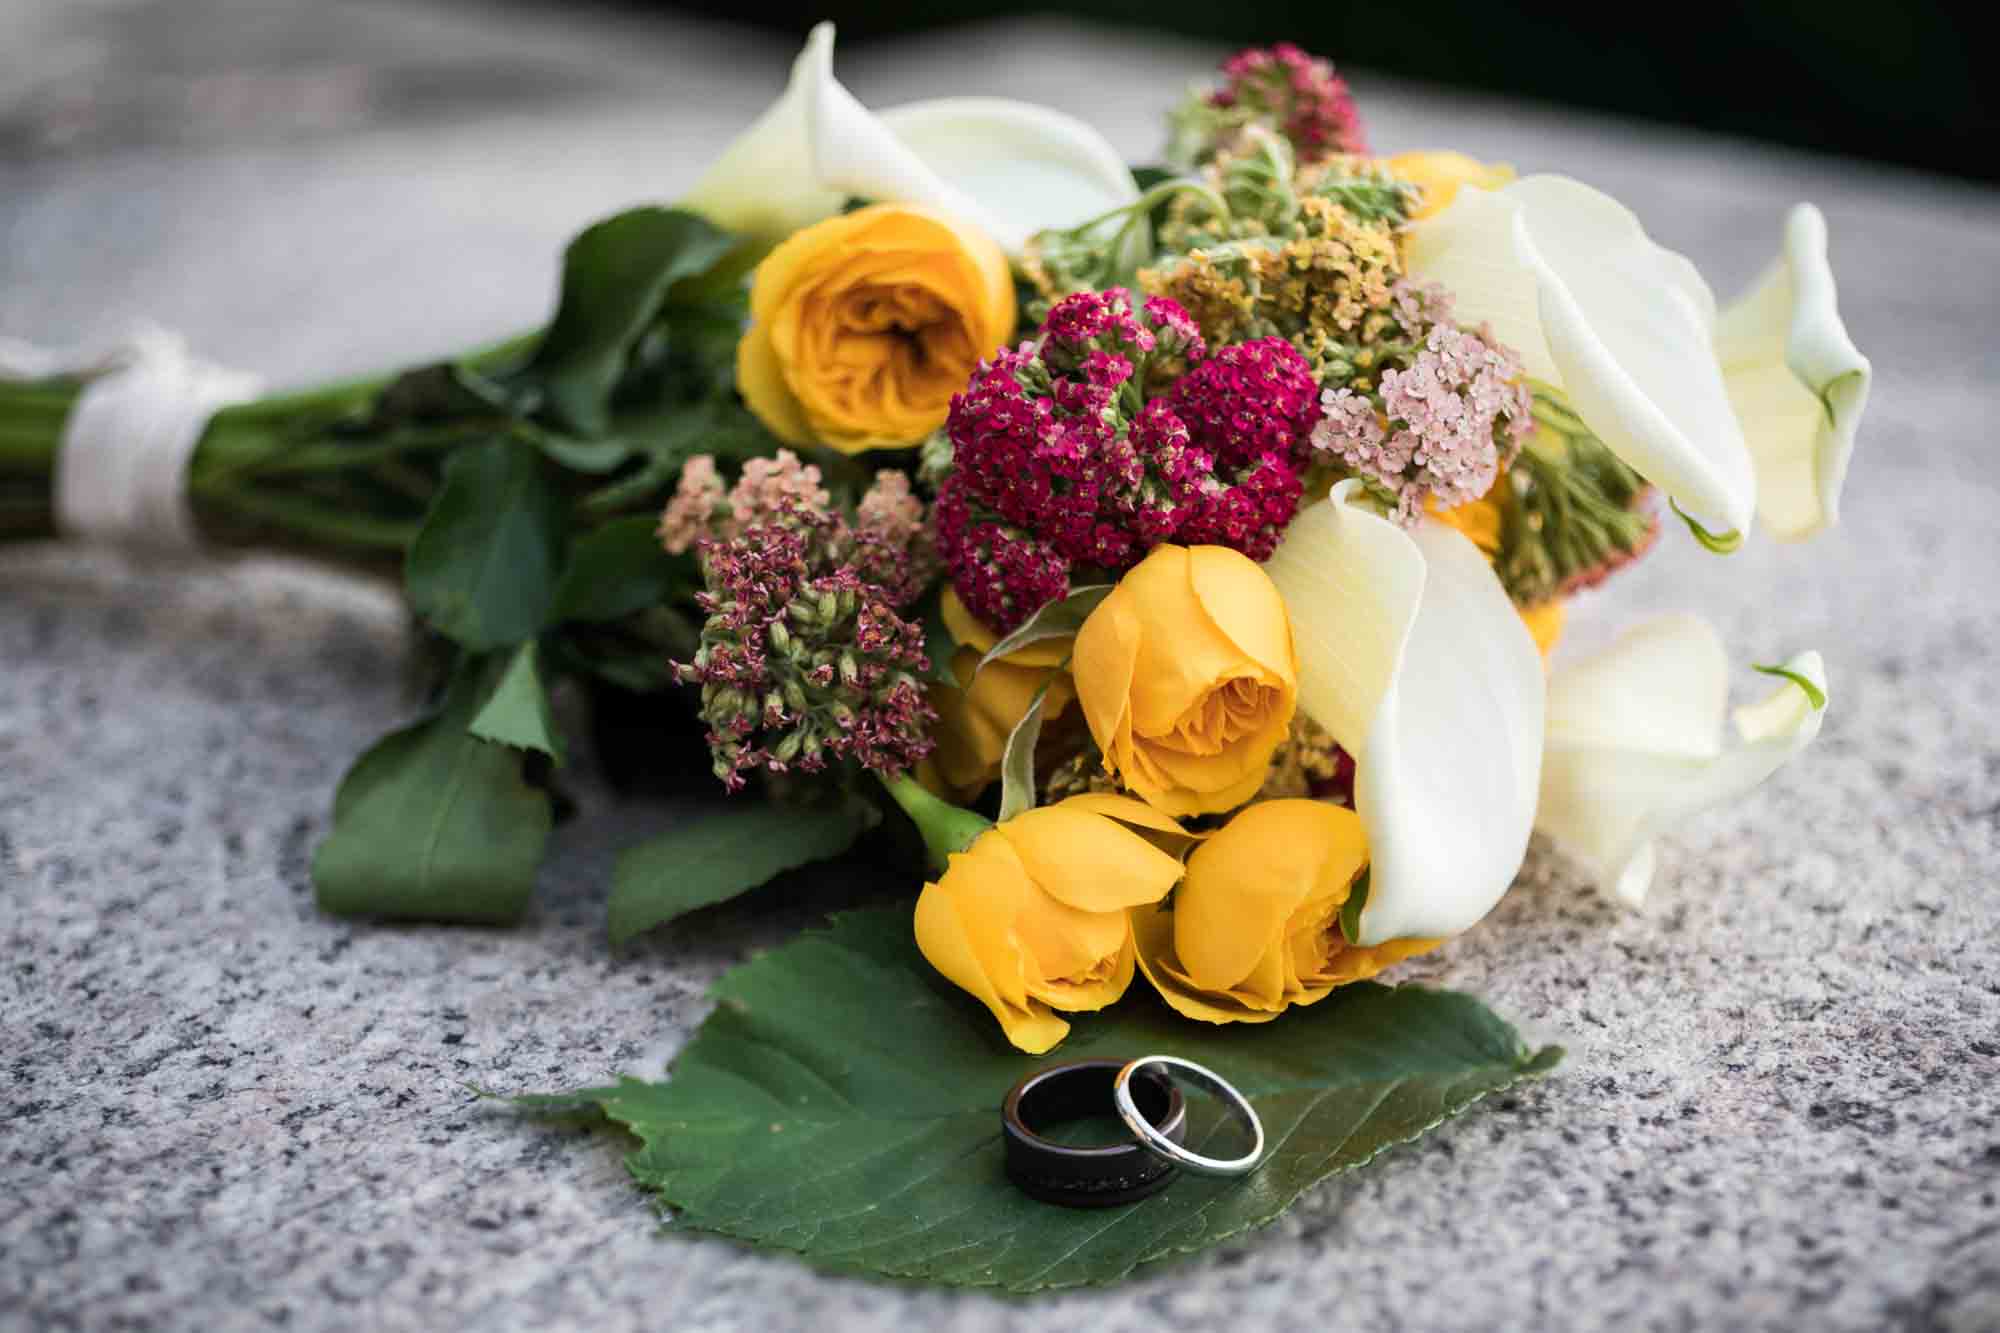 Yellow and white flower bouquet with wedding rings on leaves for article on wedding bouquet photo tips